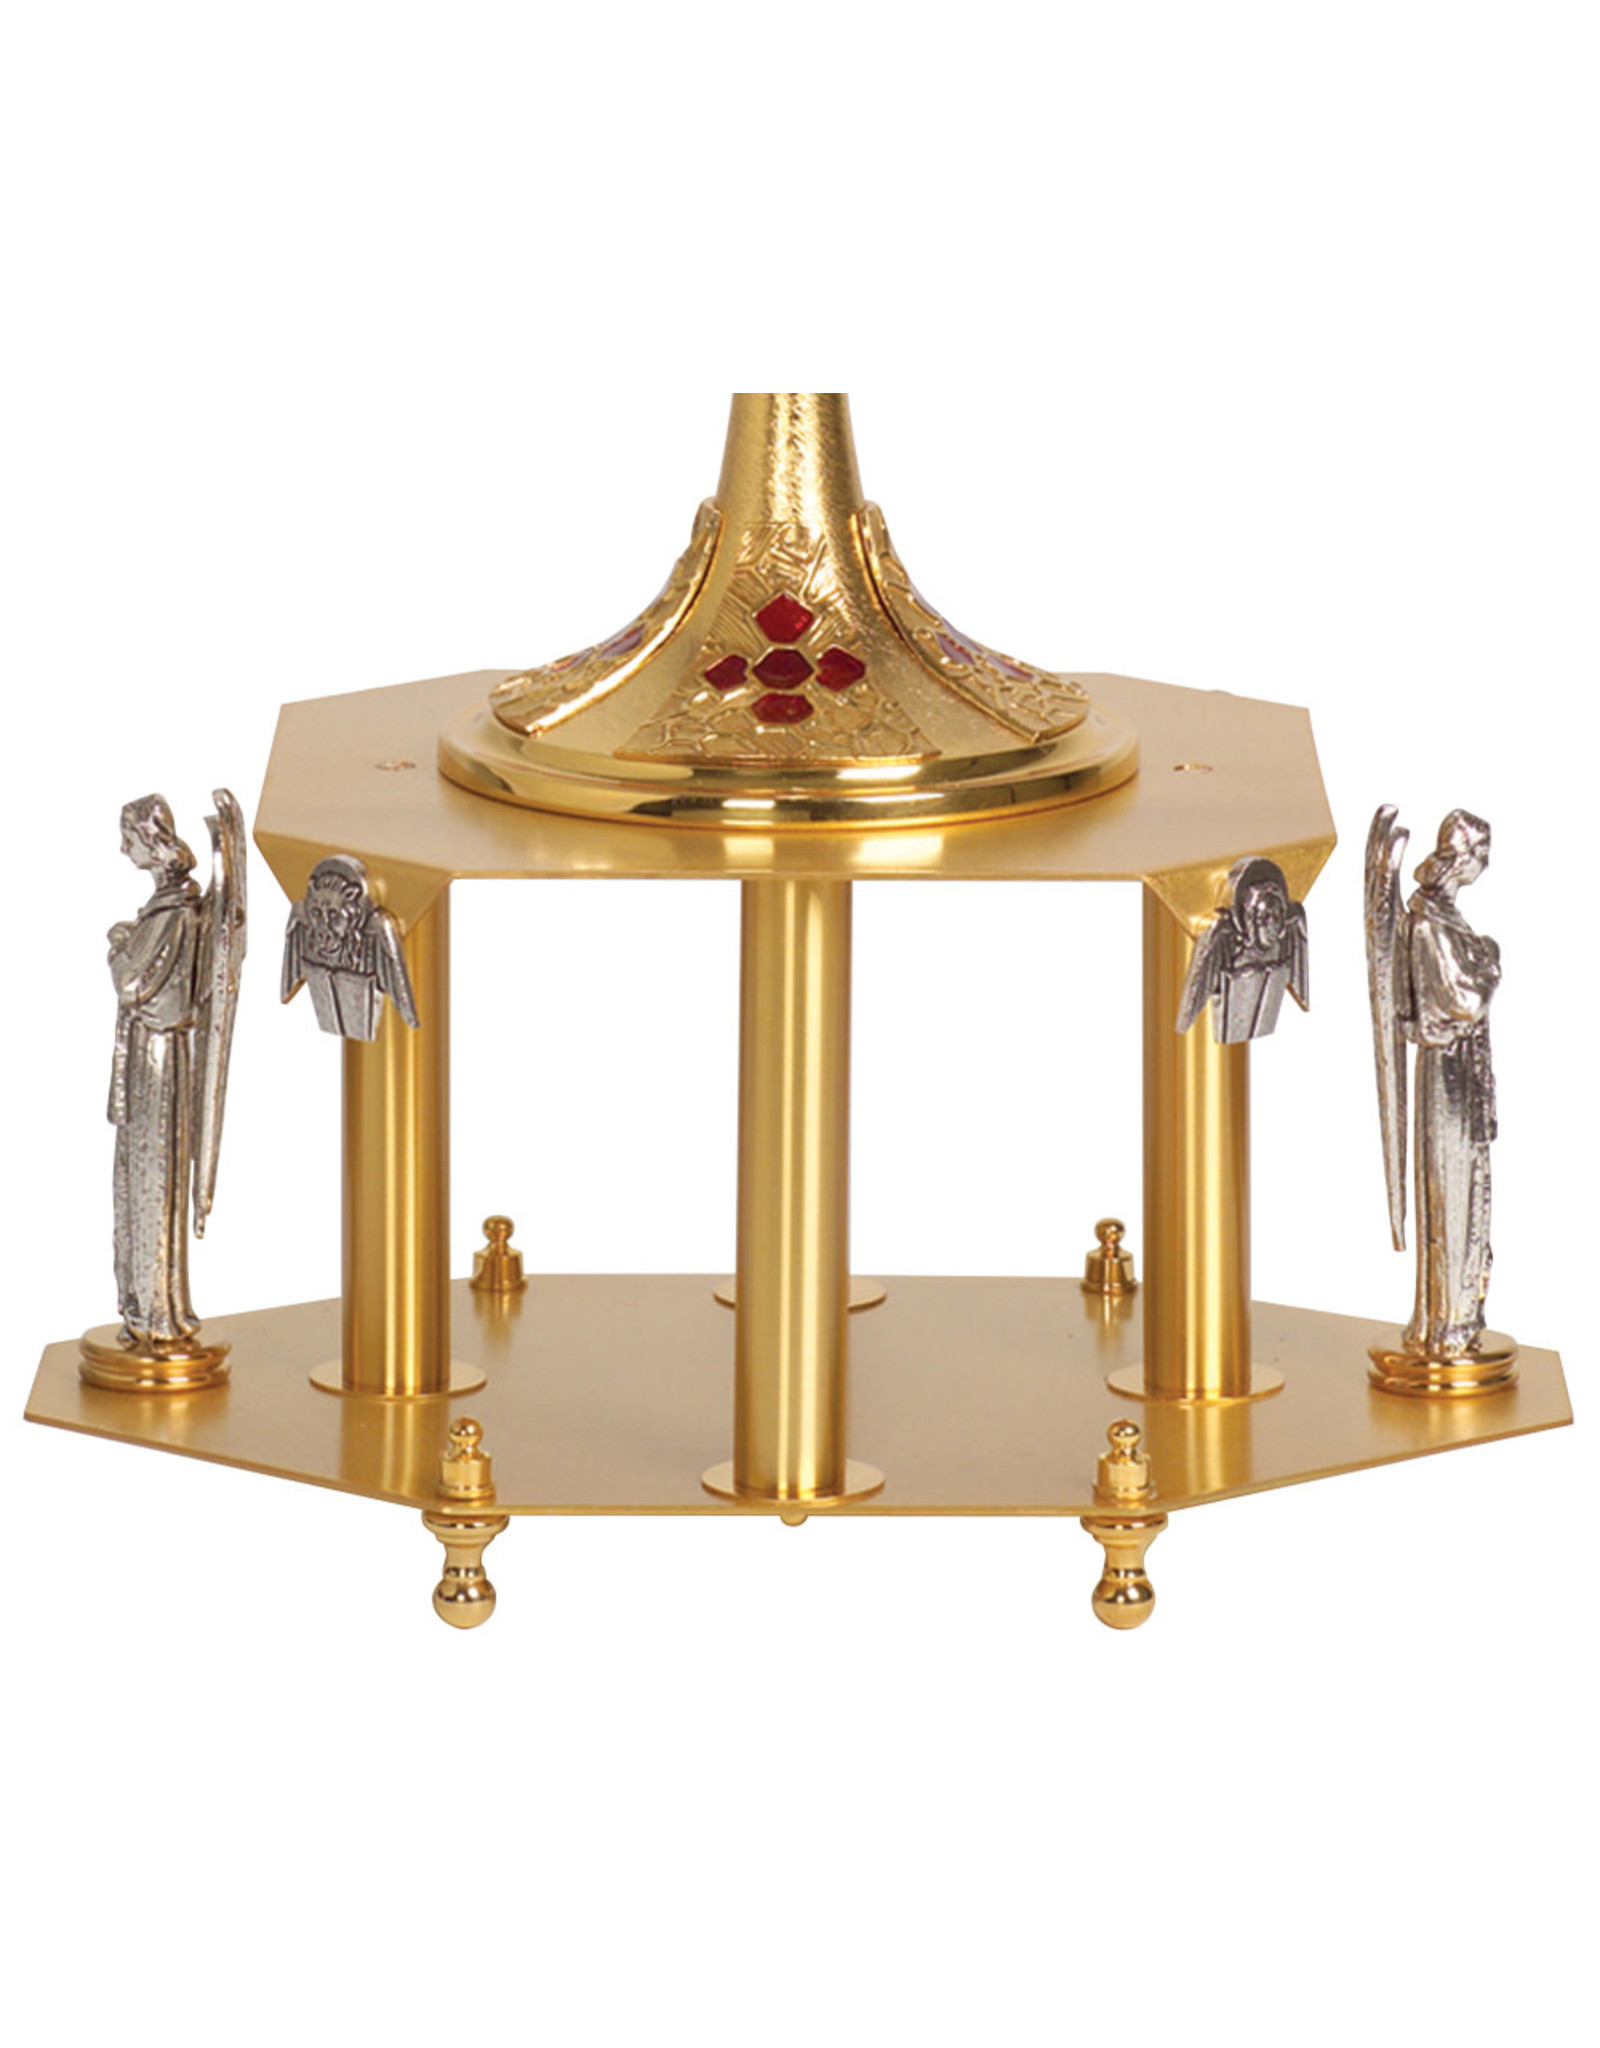 Koleys Thabor (Pedestal) with Two Angels and Four Medallions